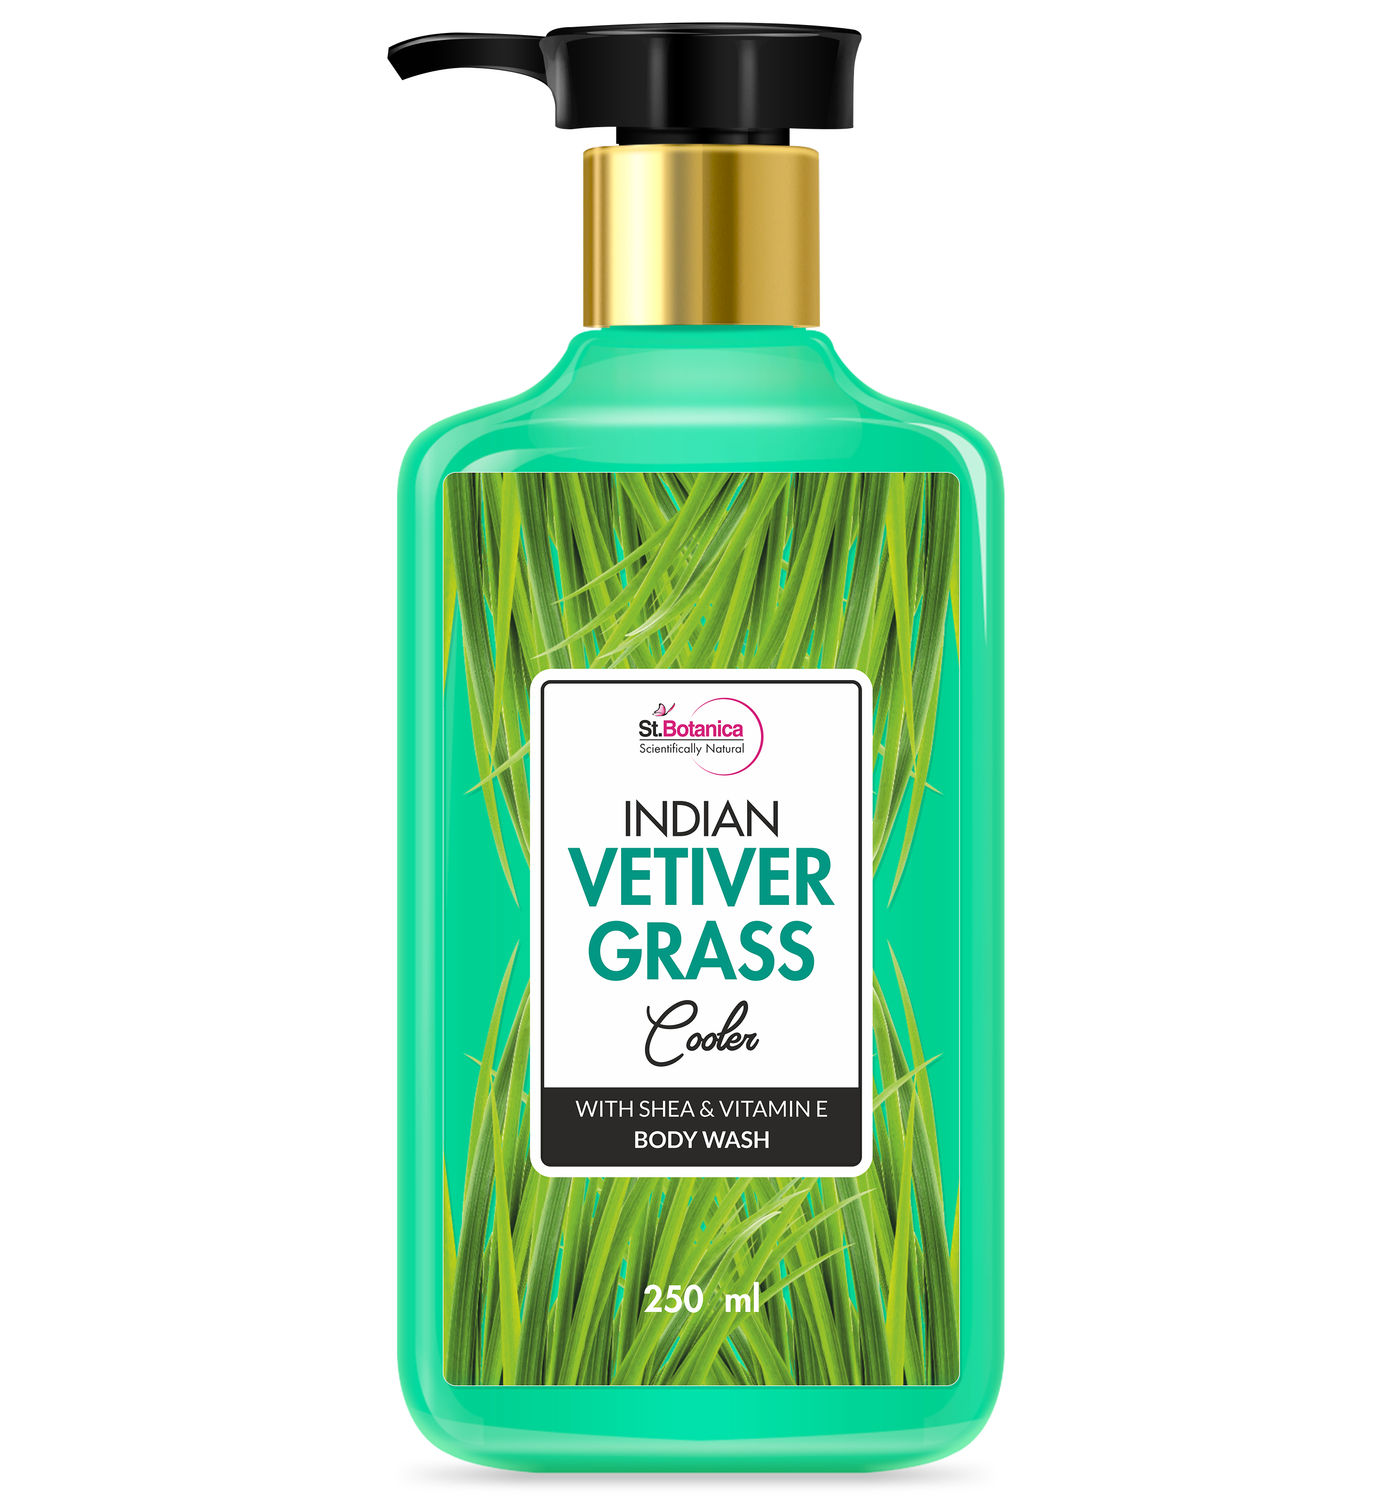 Buy St Botanica Indian Vetiver Grass Cooler Body Wash - With Shea & Vitamin E (Shower Gel), 250 ml - Purplle